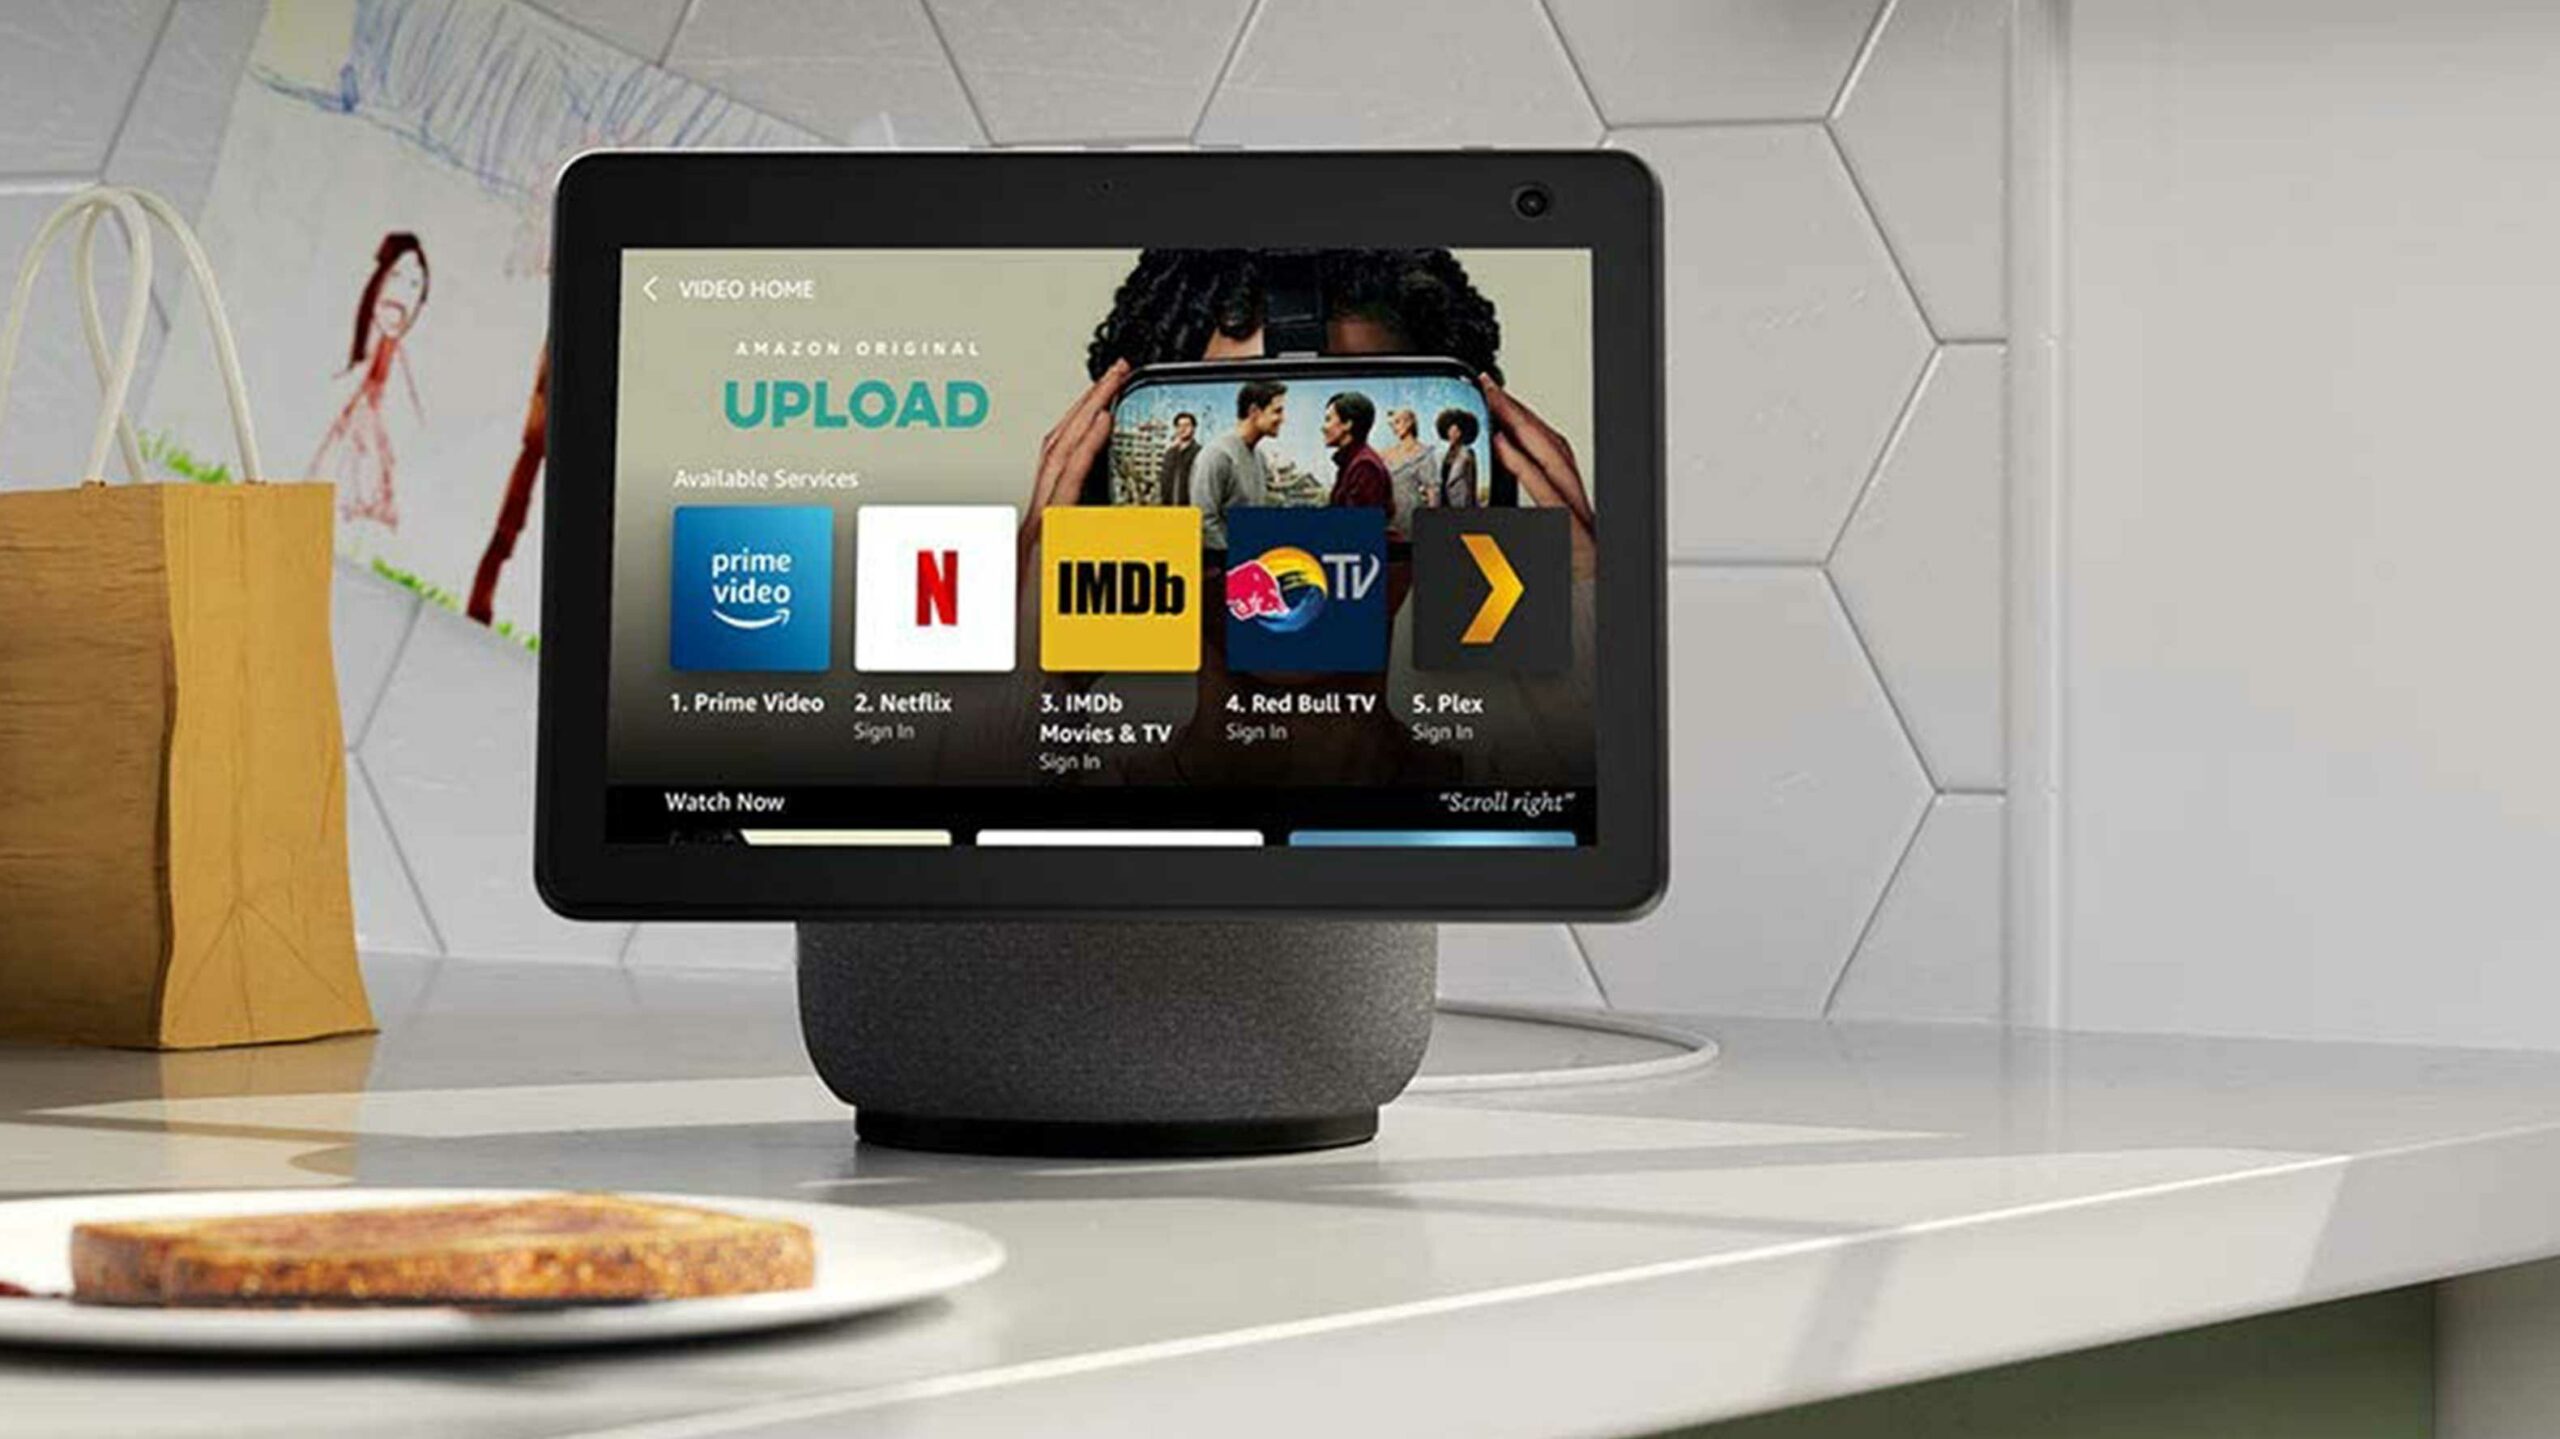 Amazon apparently releasing its own big-screen televisions with Alexa features